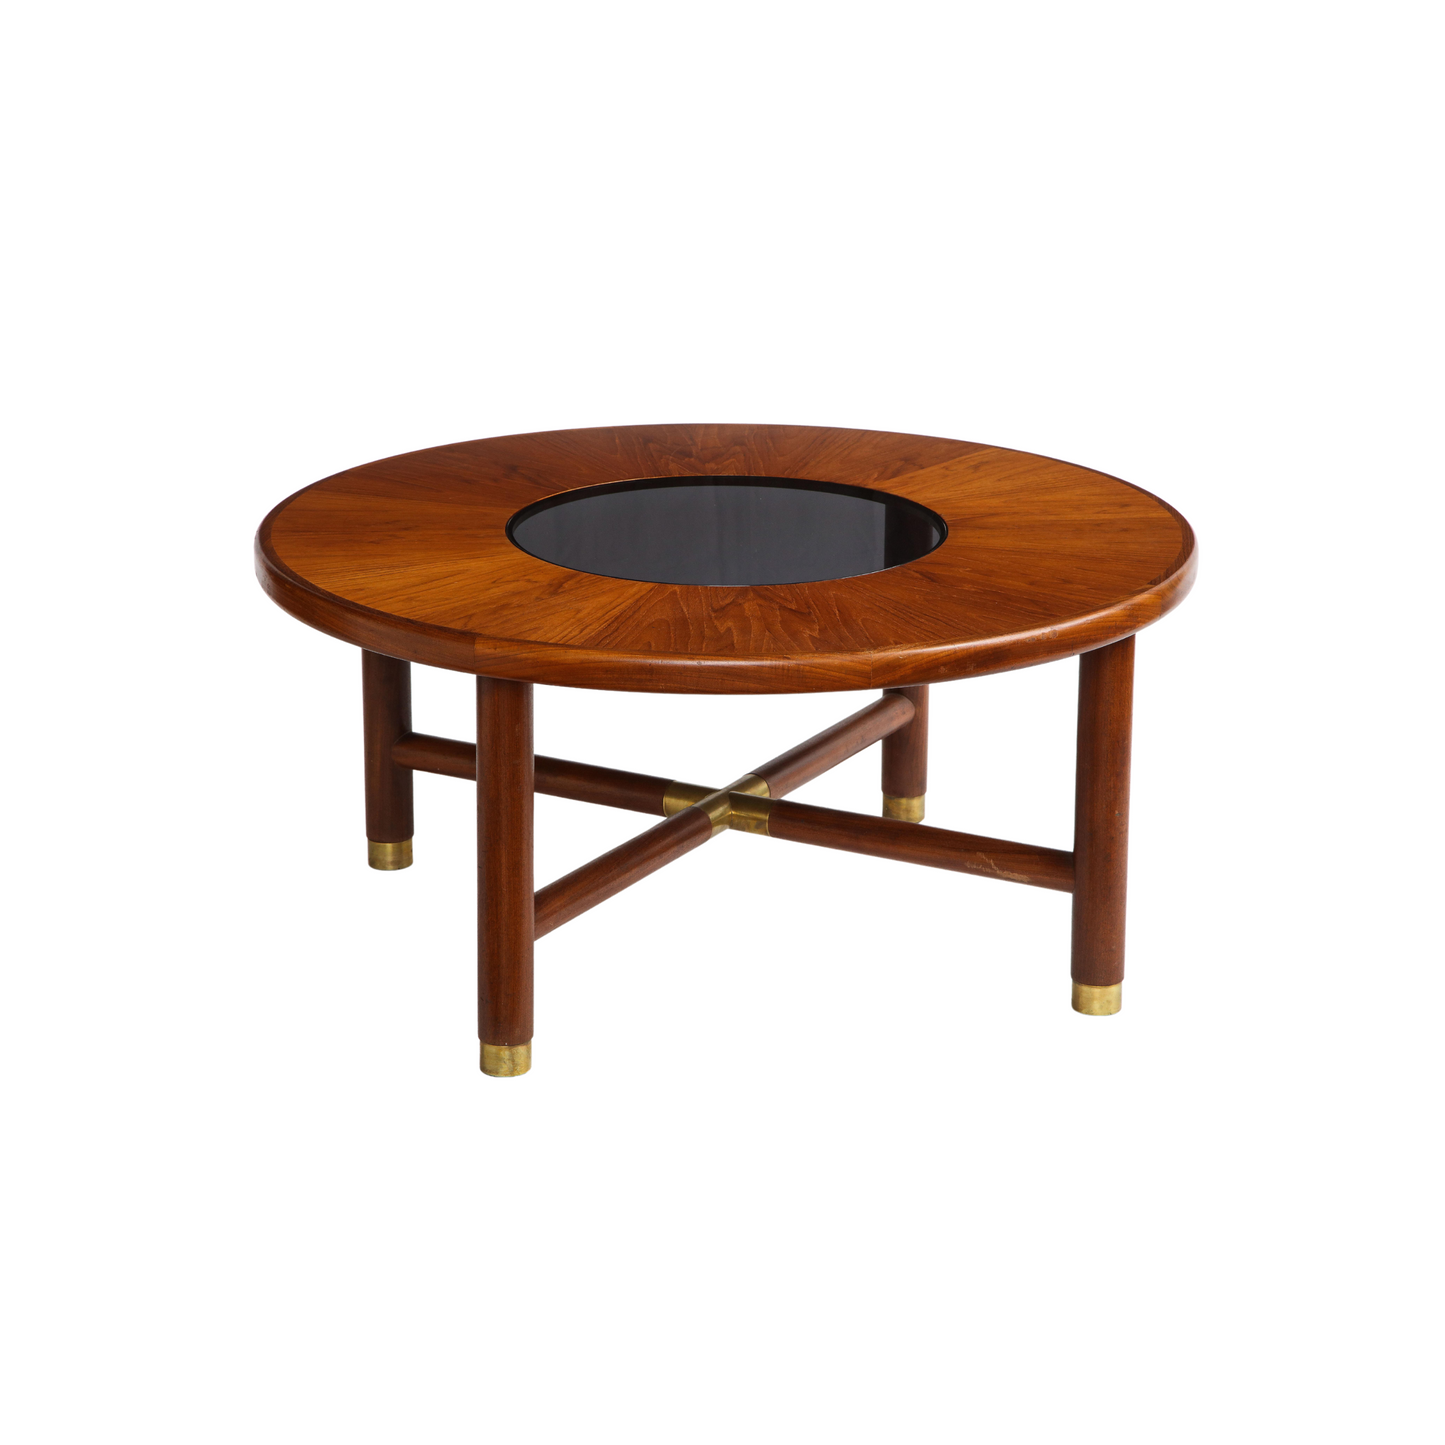 Midcentury Round Teak and Smoked Glass Coffee Table by G-Plan, U.K. 1960s